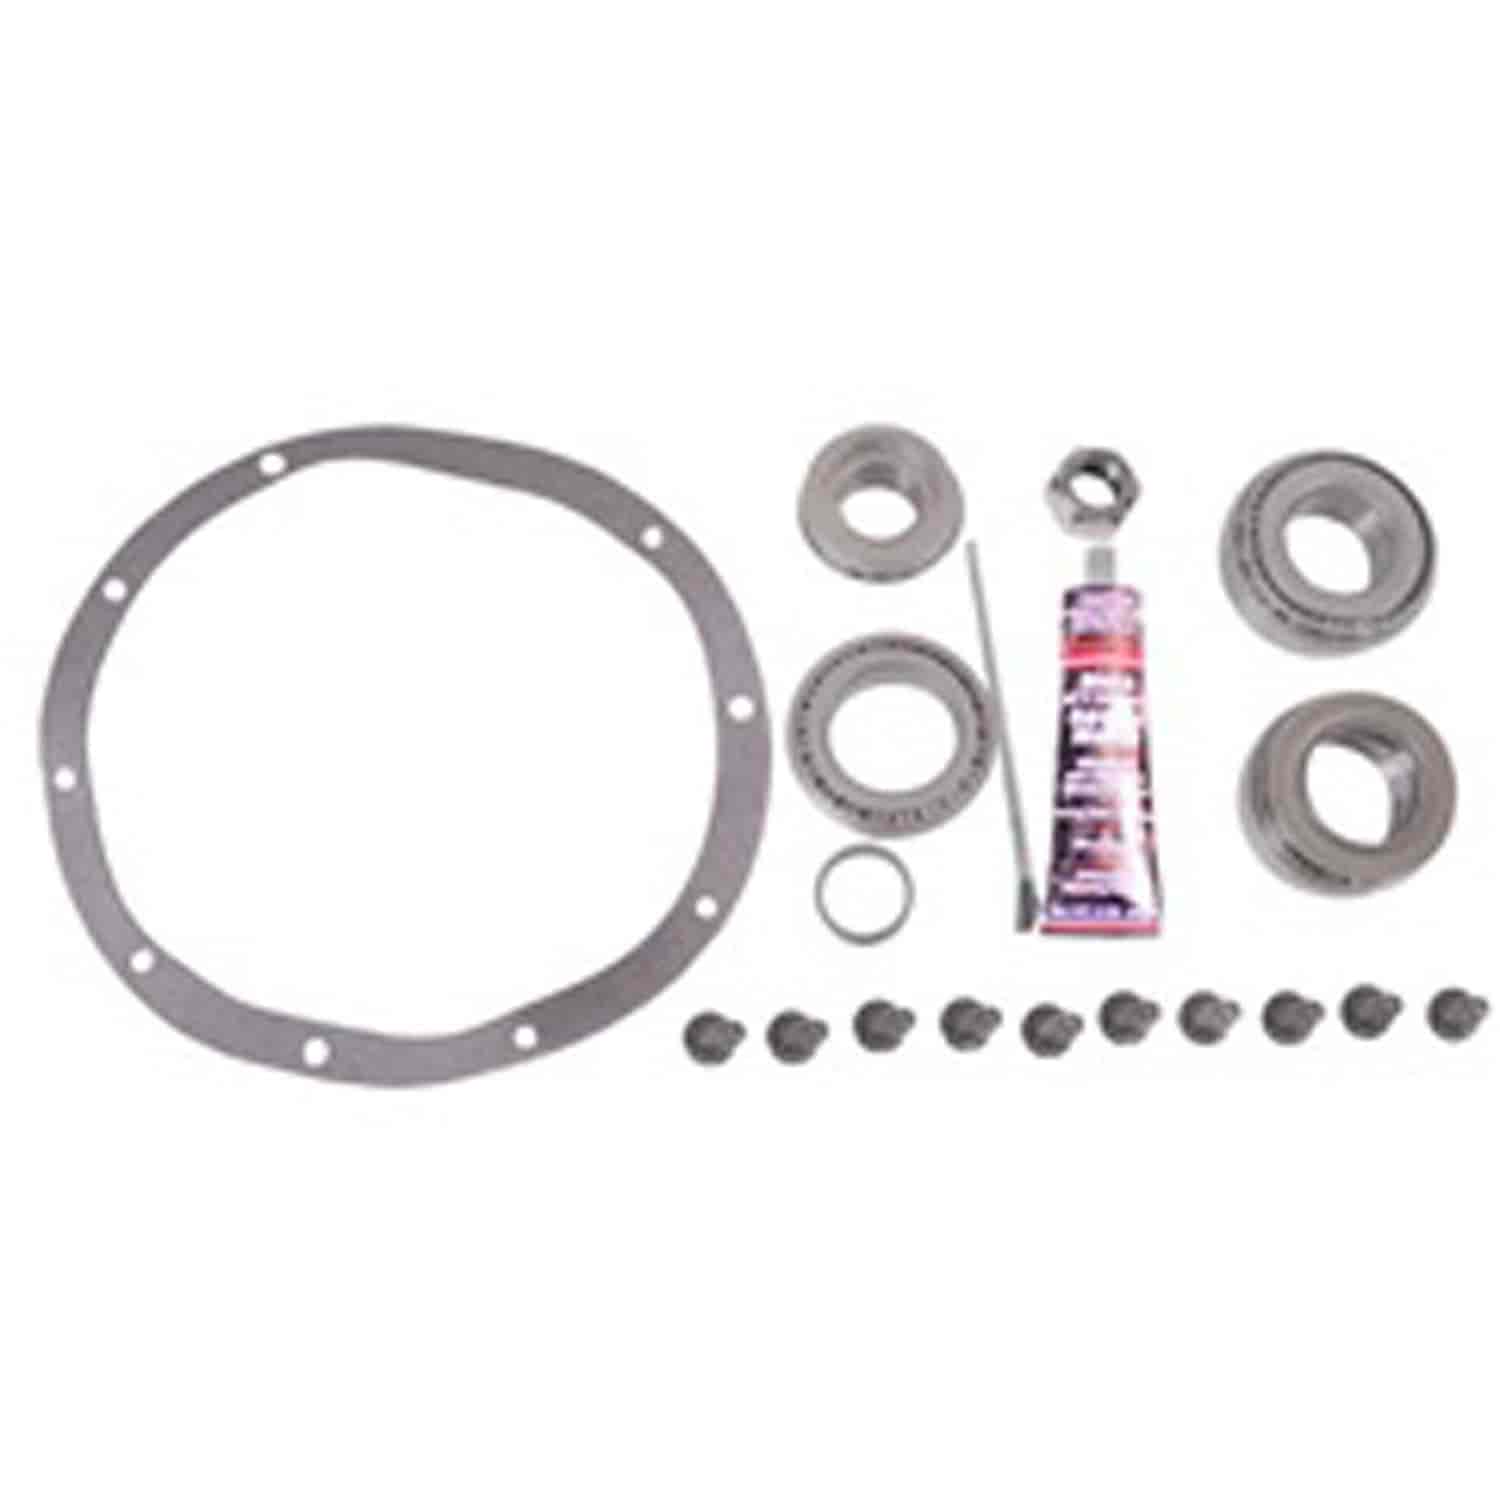 This axle rebuild kit fits Chrysler 8.25 rear axles found in 91-01 Jeep Cherokee XJ .